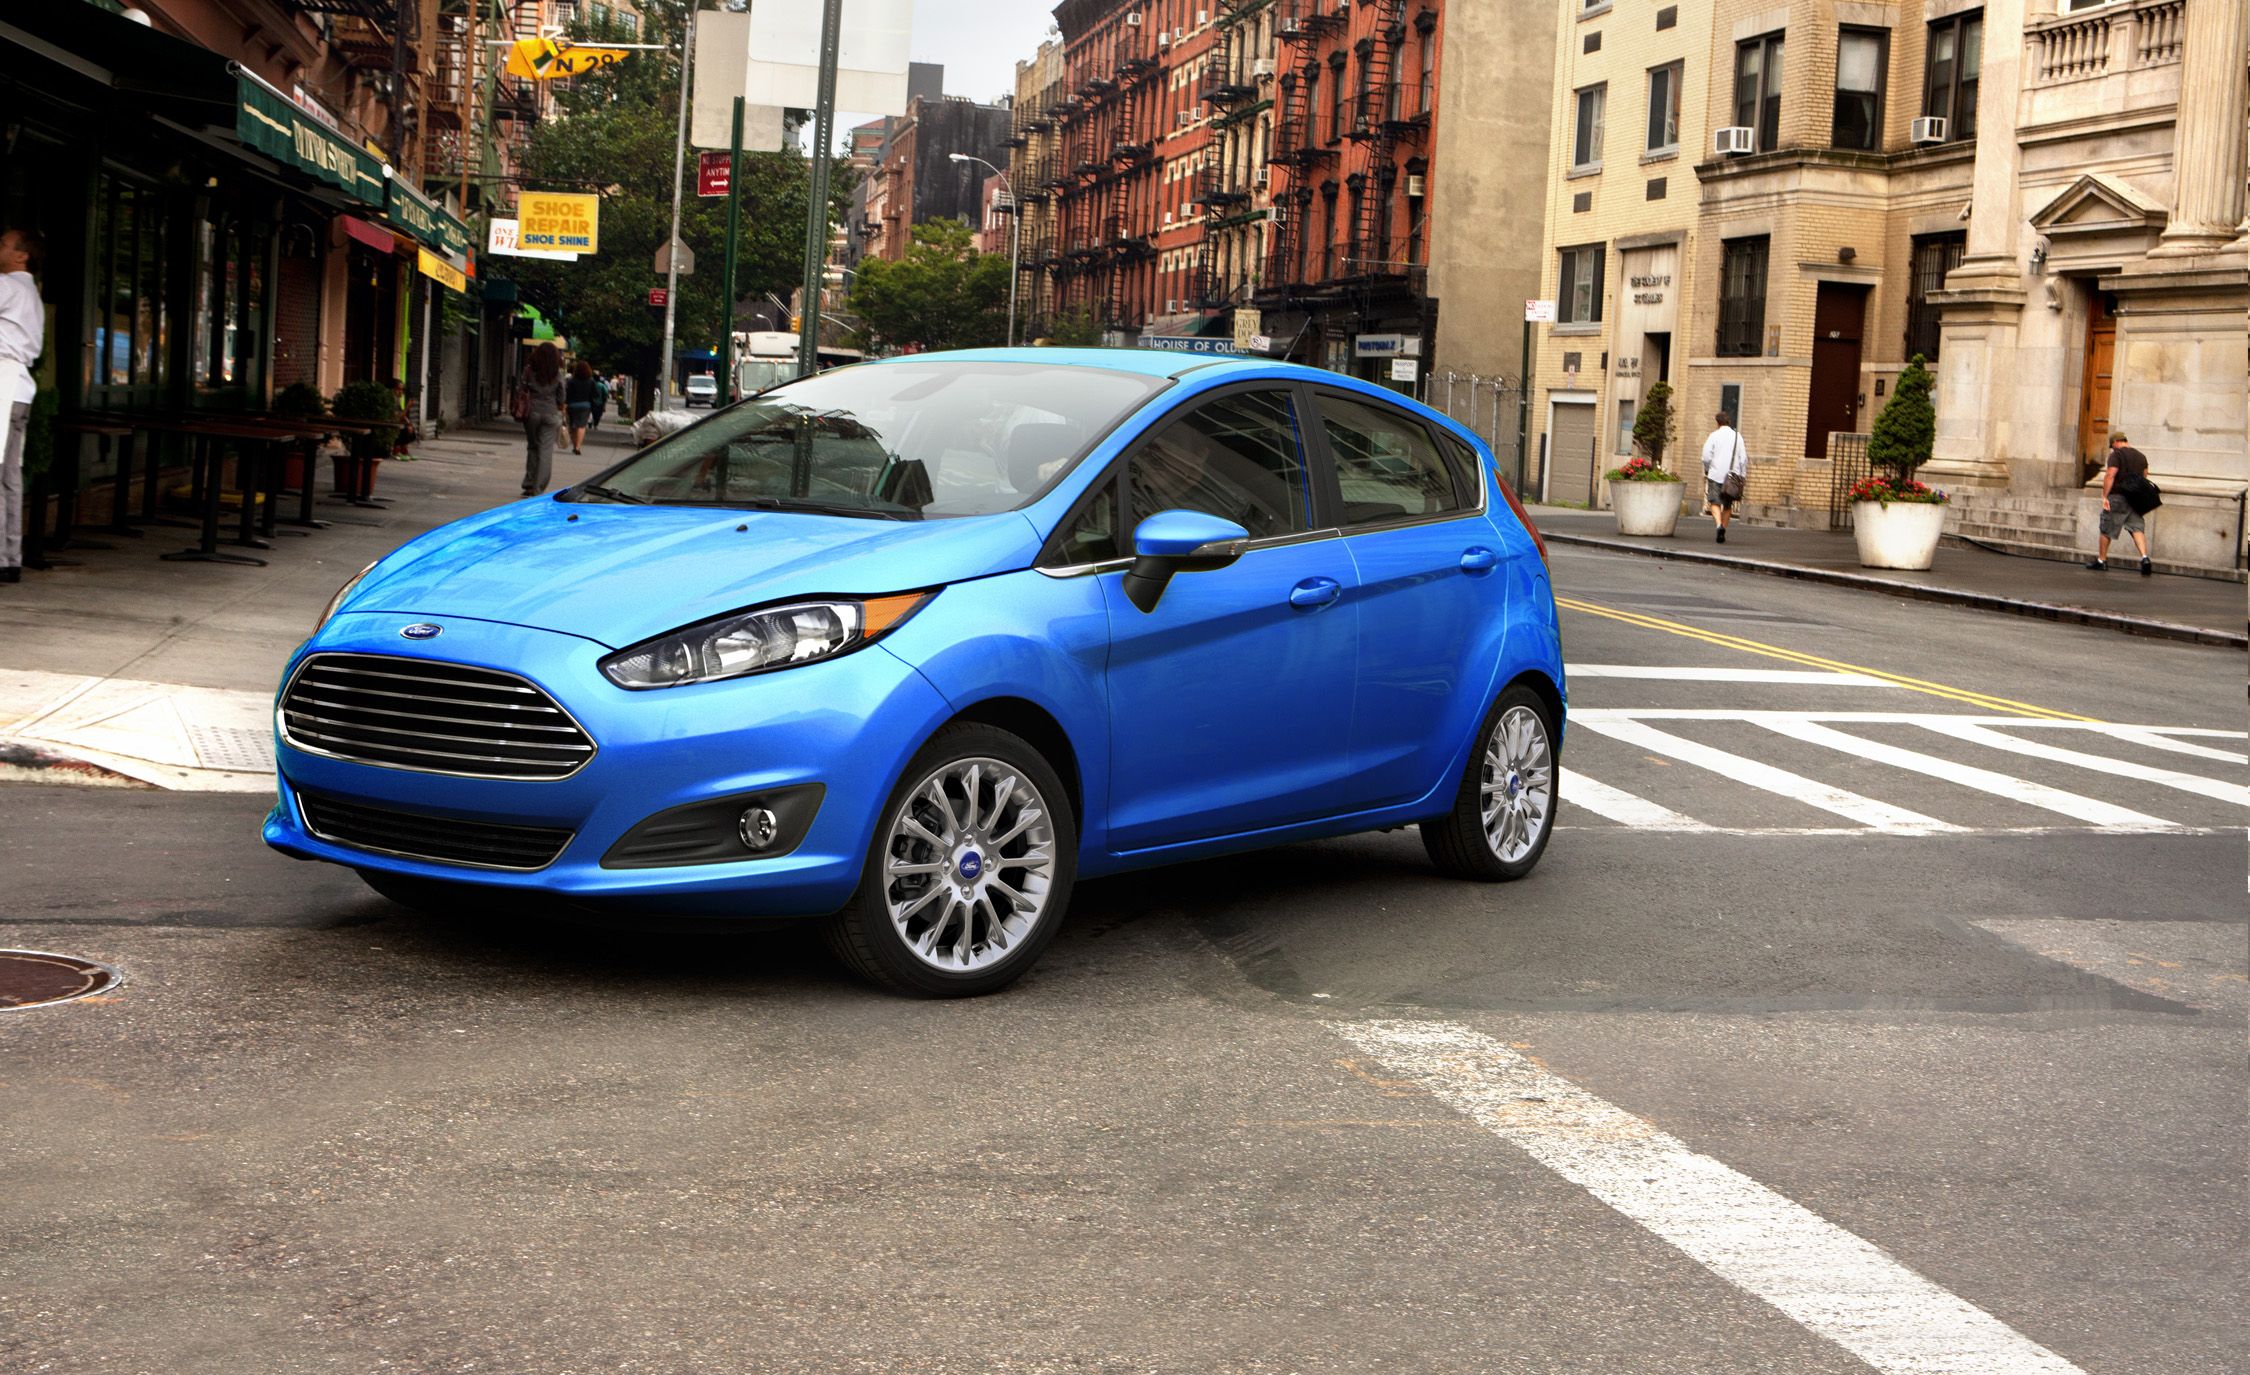 Test drive: Ford Fiesta ST is a fun, economical subcompact